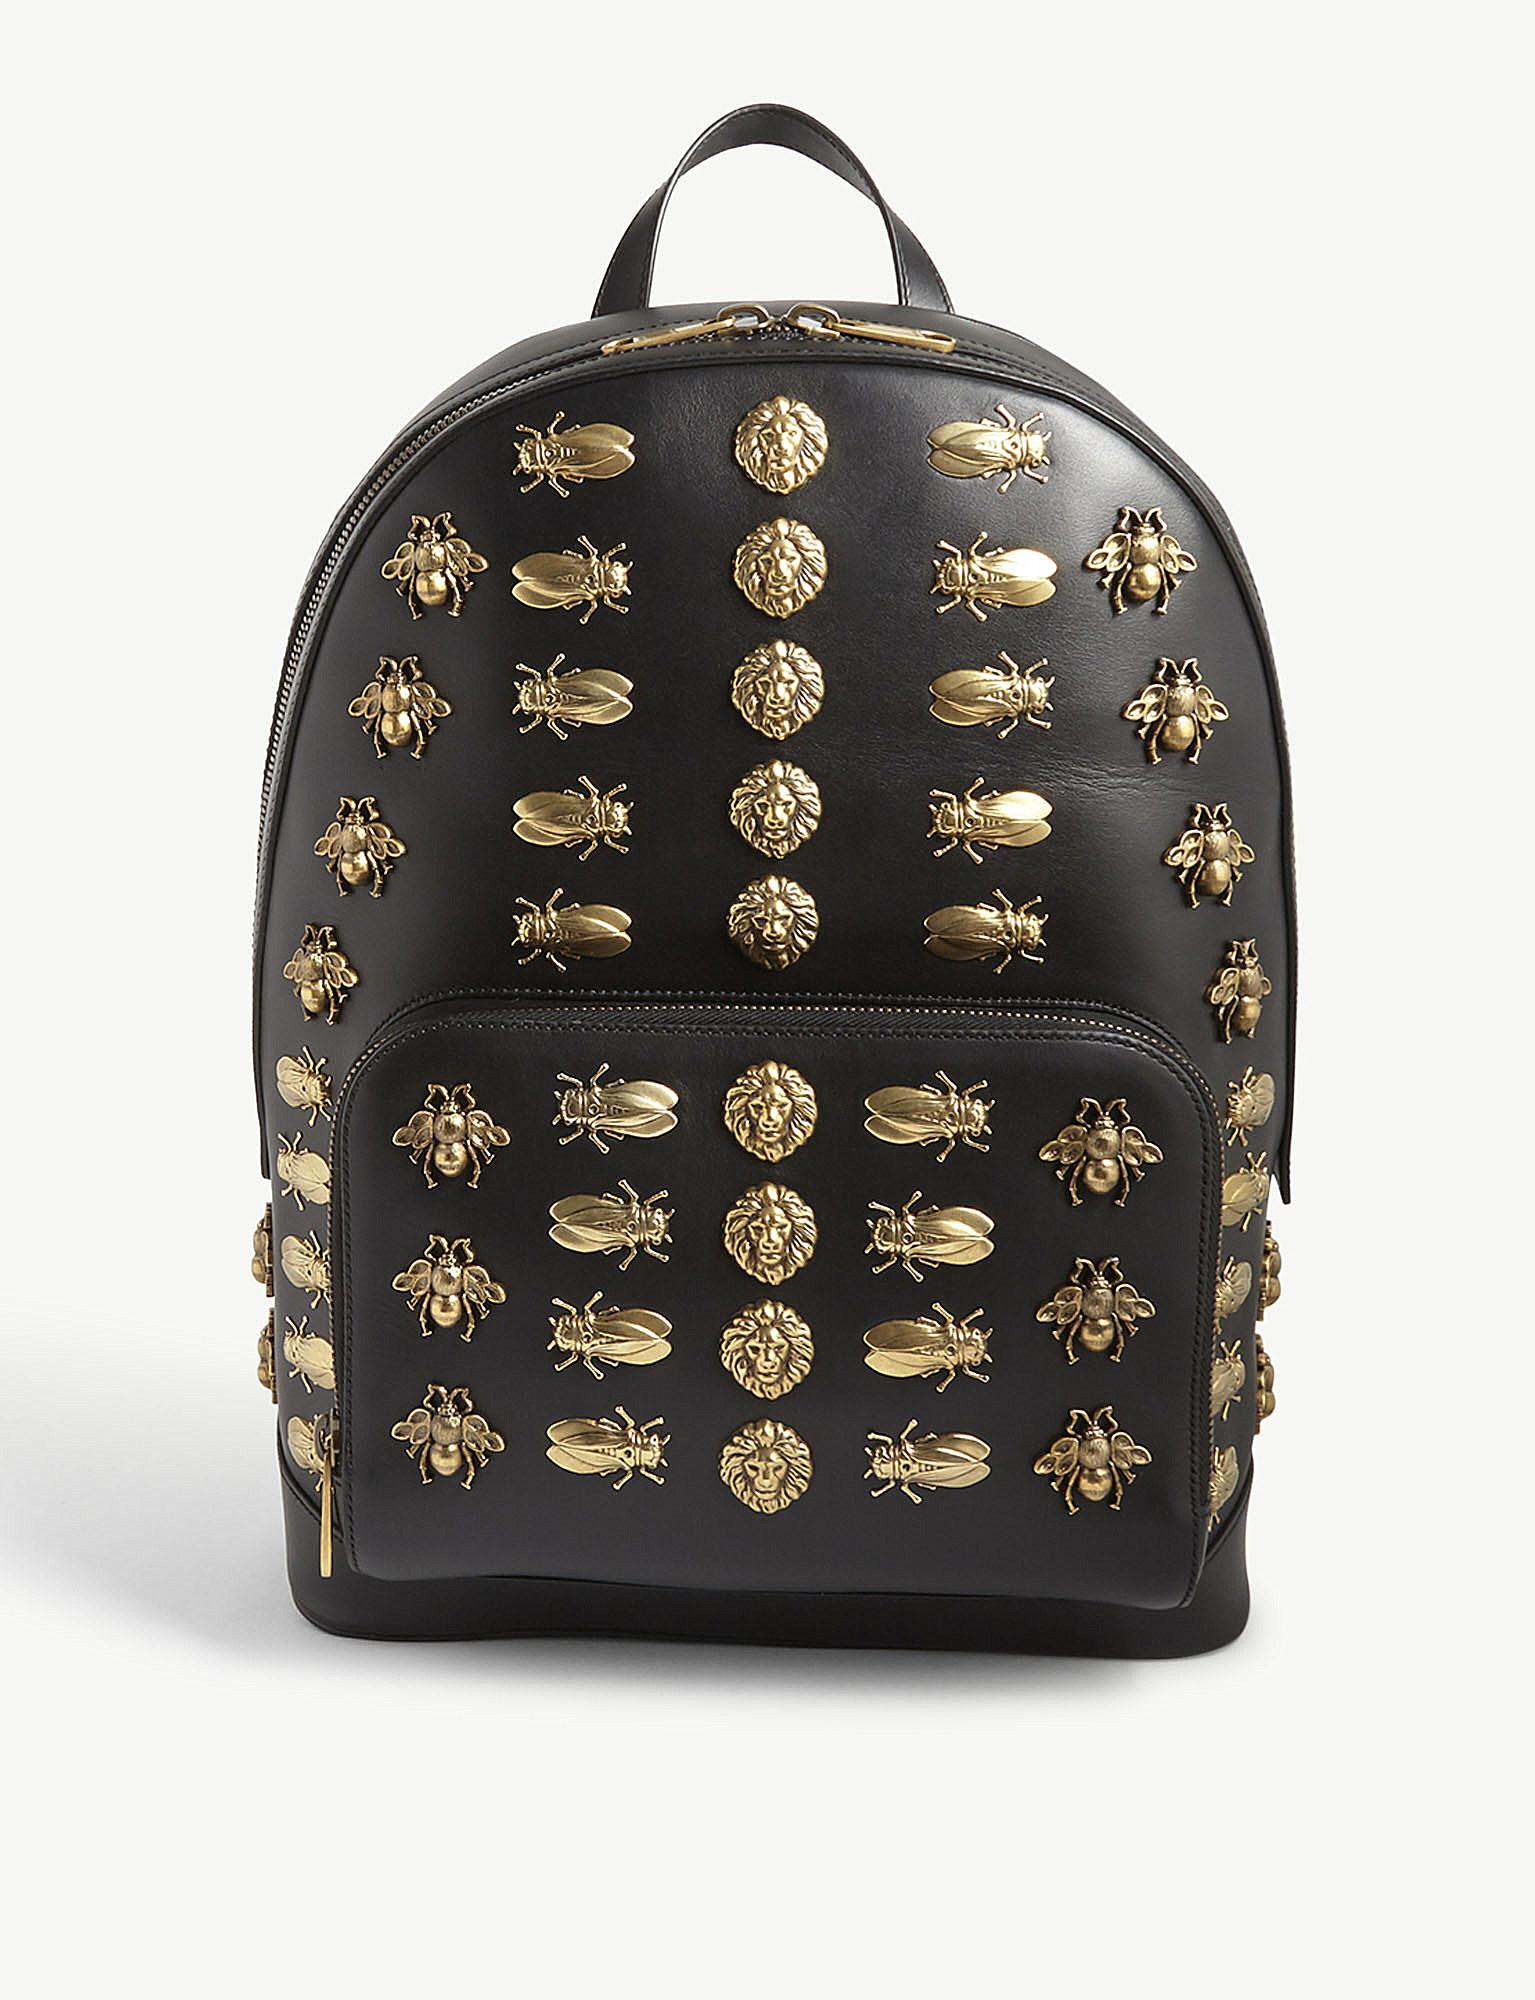 Gucci Brass Insects Leather Backpack in -